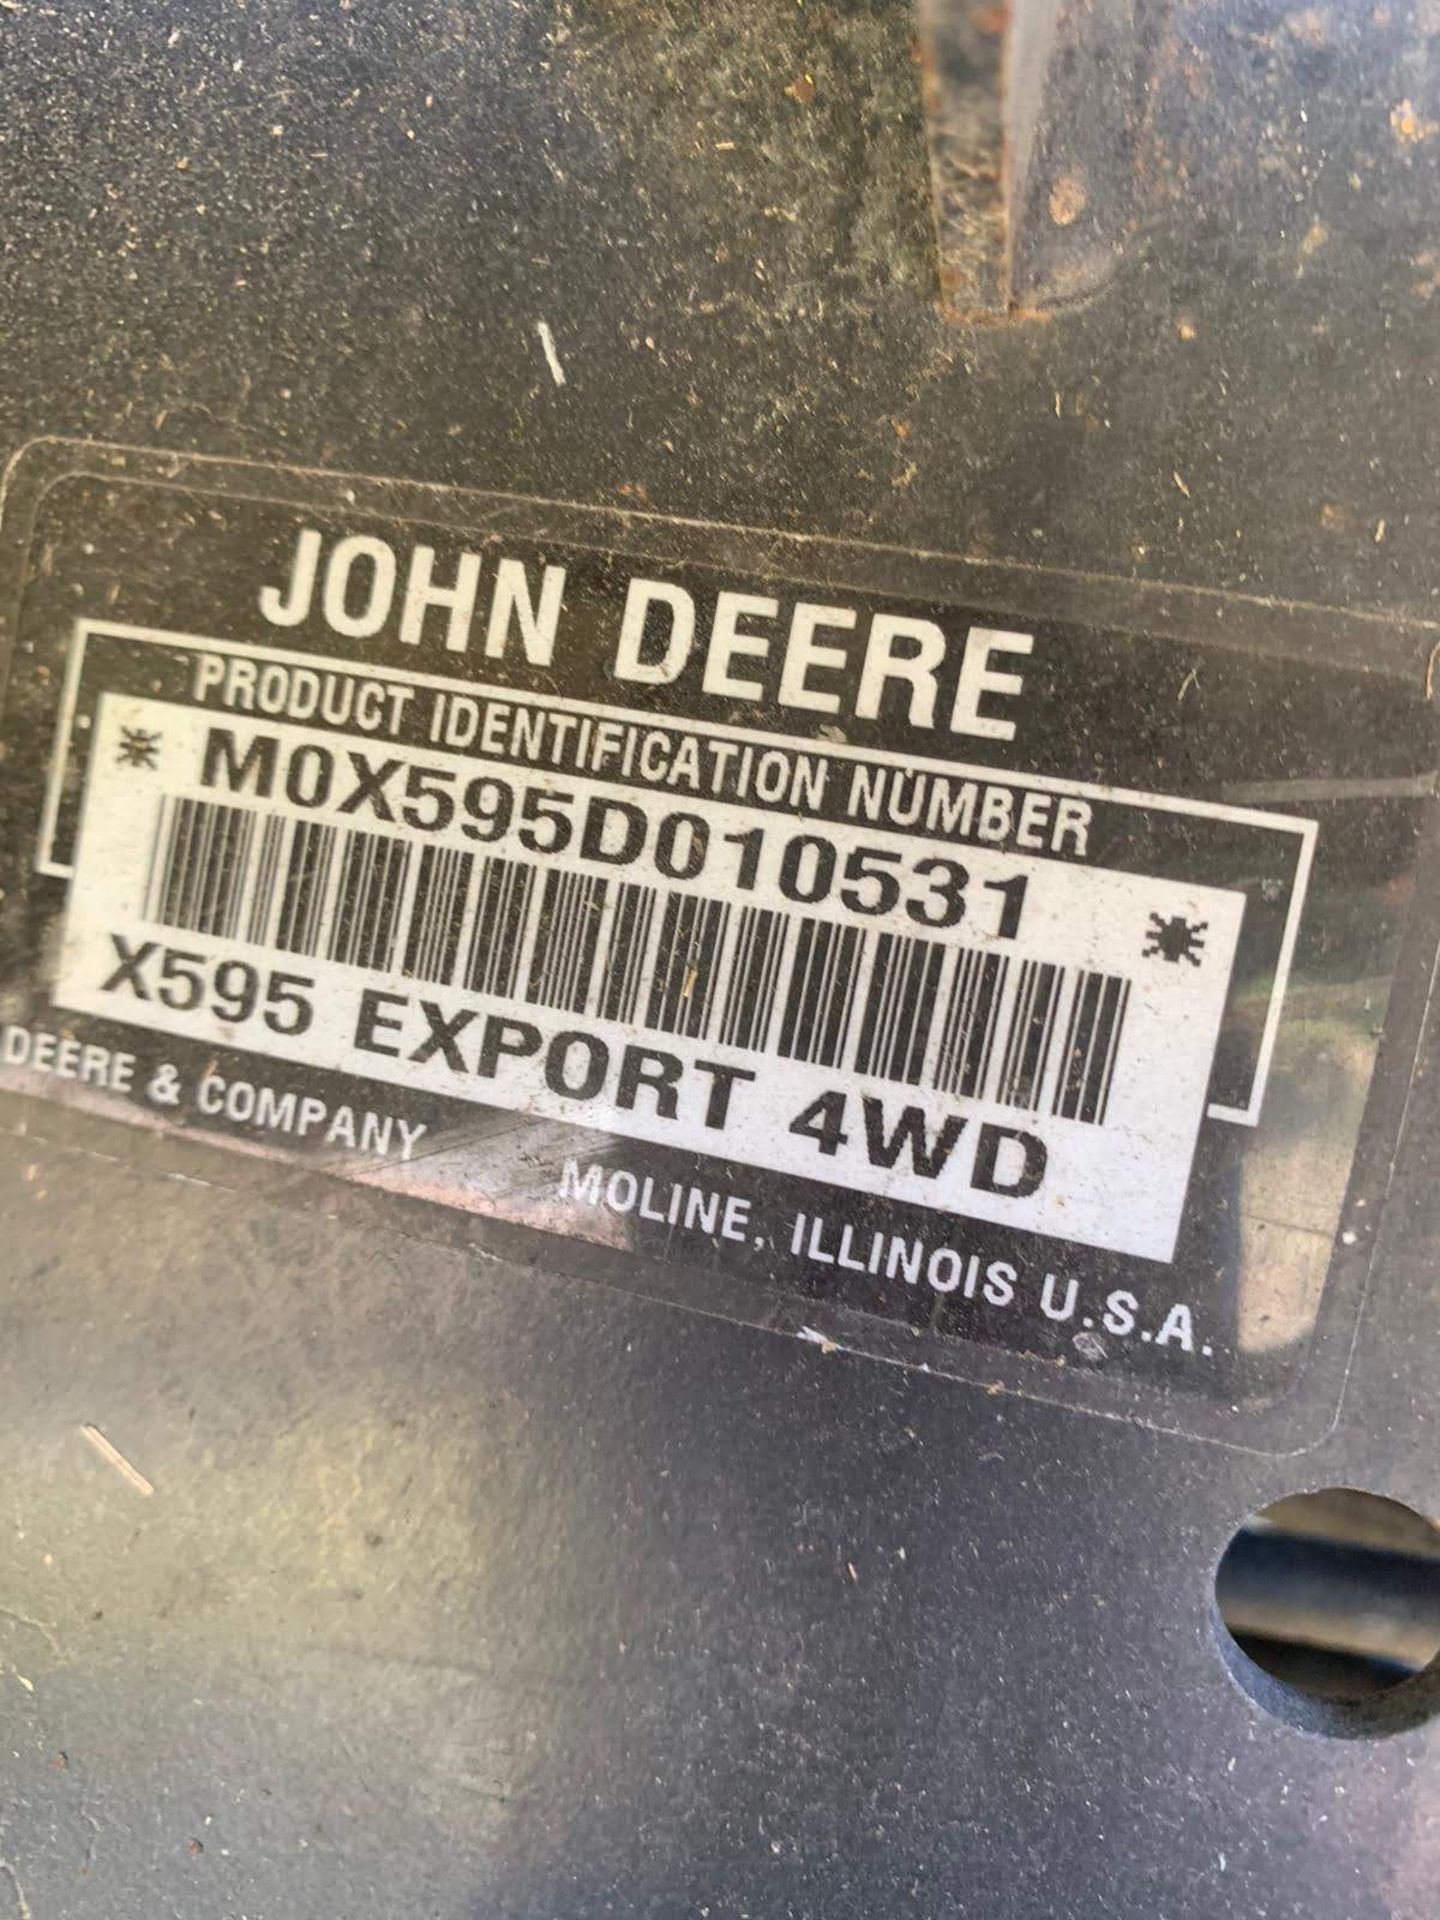 JOHN DEERE X595 RIDE ON LAWN MOWER, RUNS, DRIVES AND CUTS, SHOWING 2080 HOURS *PLUS VAT* - Image 15 of 16